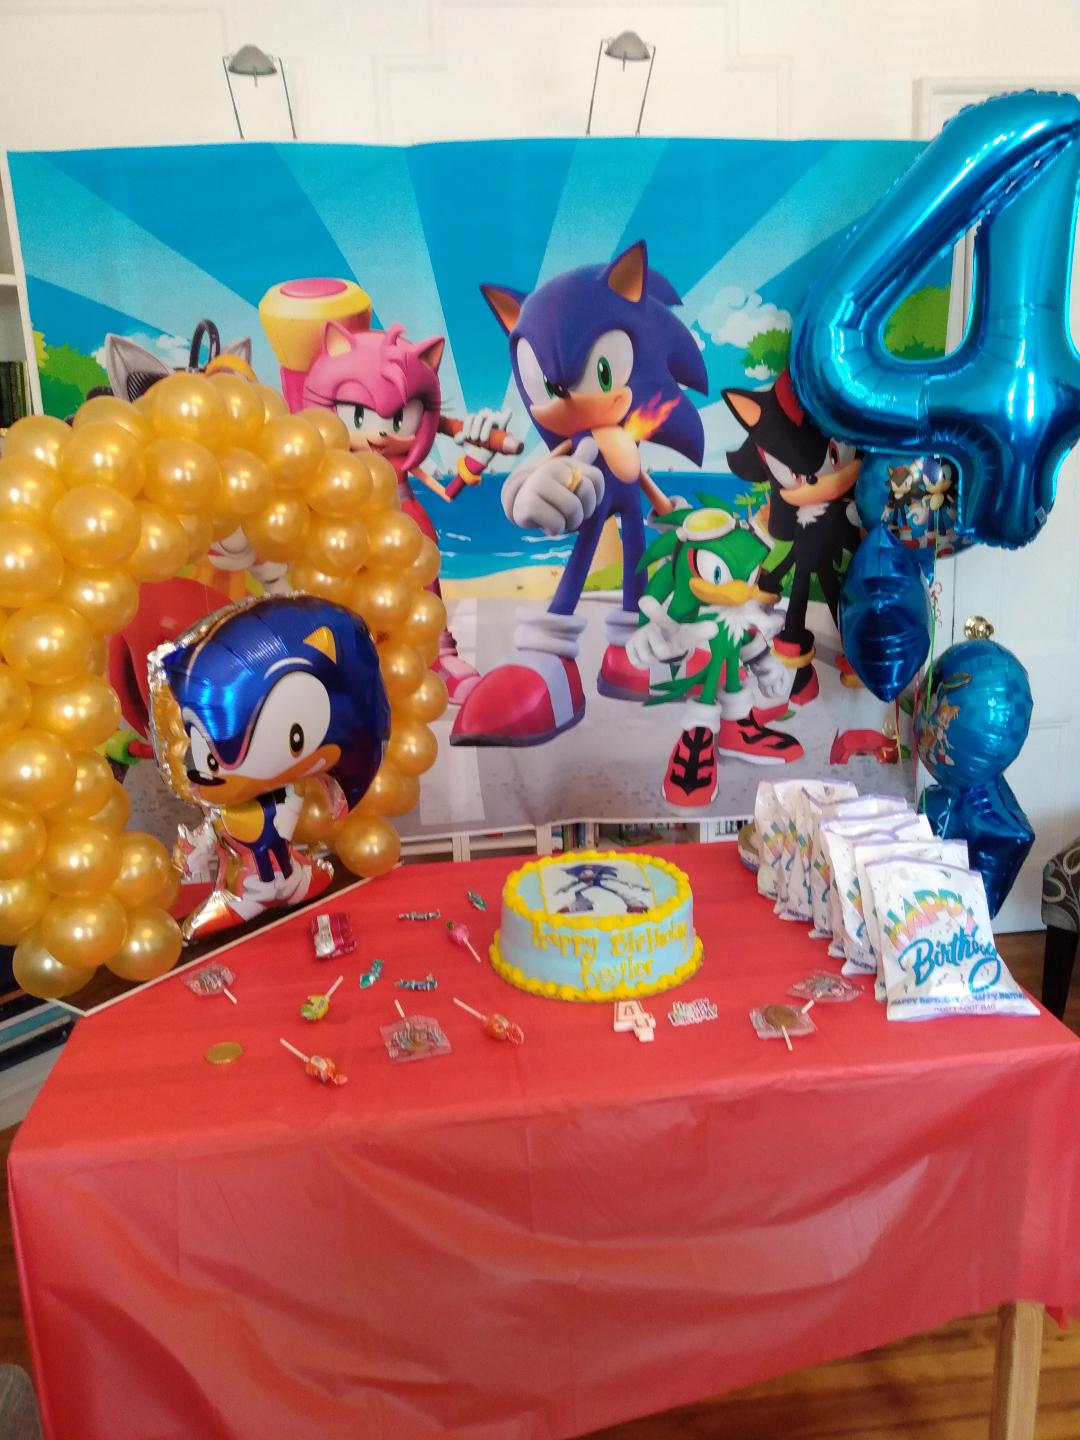 PARTY #232, SONIC 4TH BIRTHDAY PARTY - PARTY DECORATIONS BY TERESA